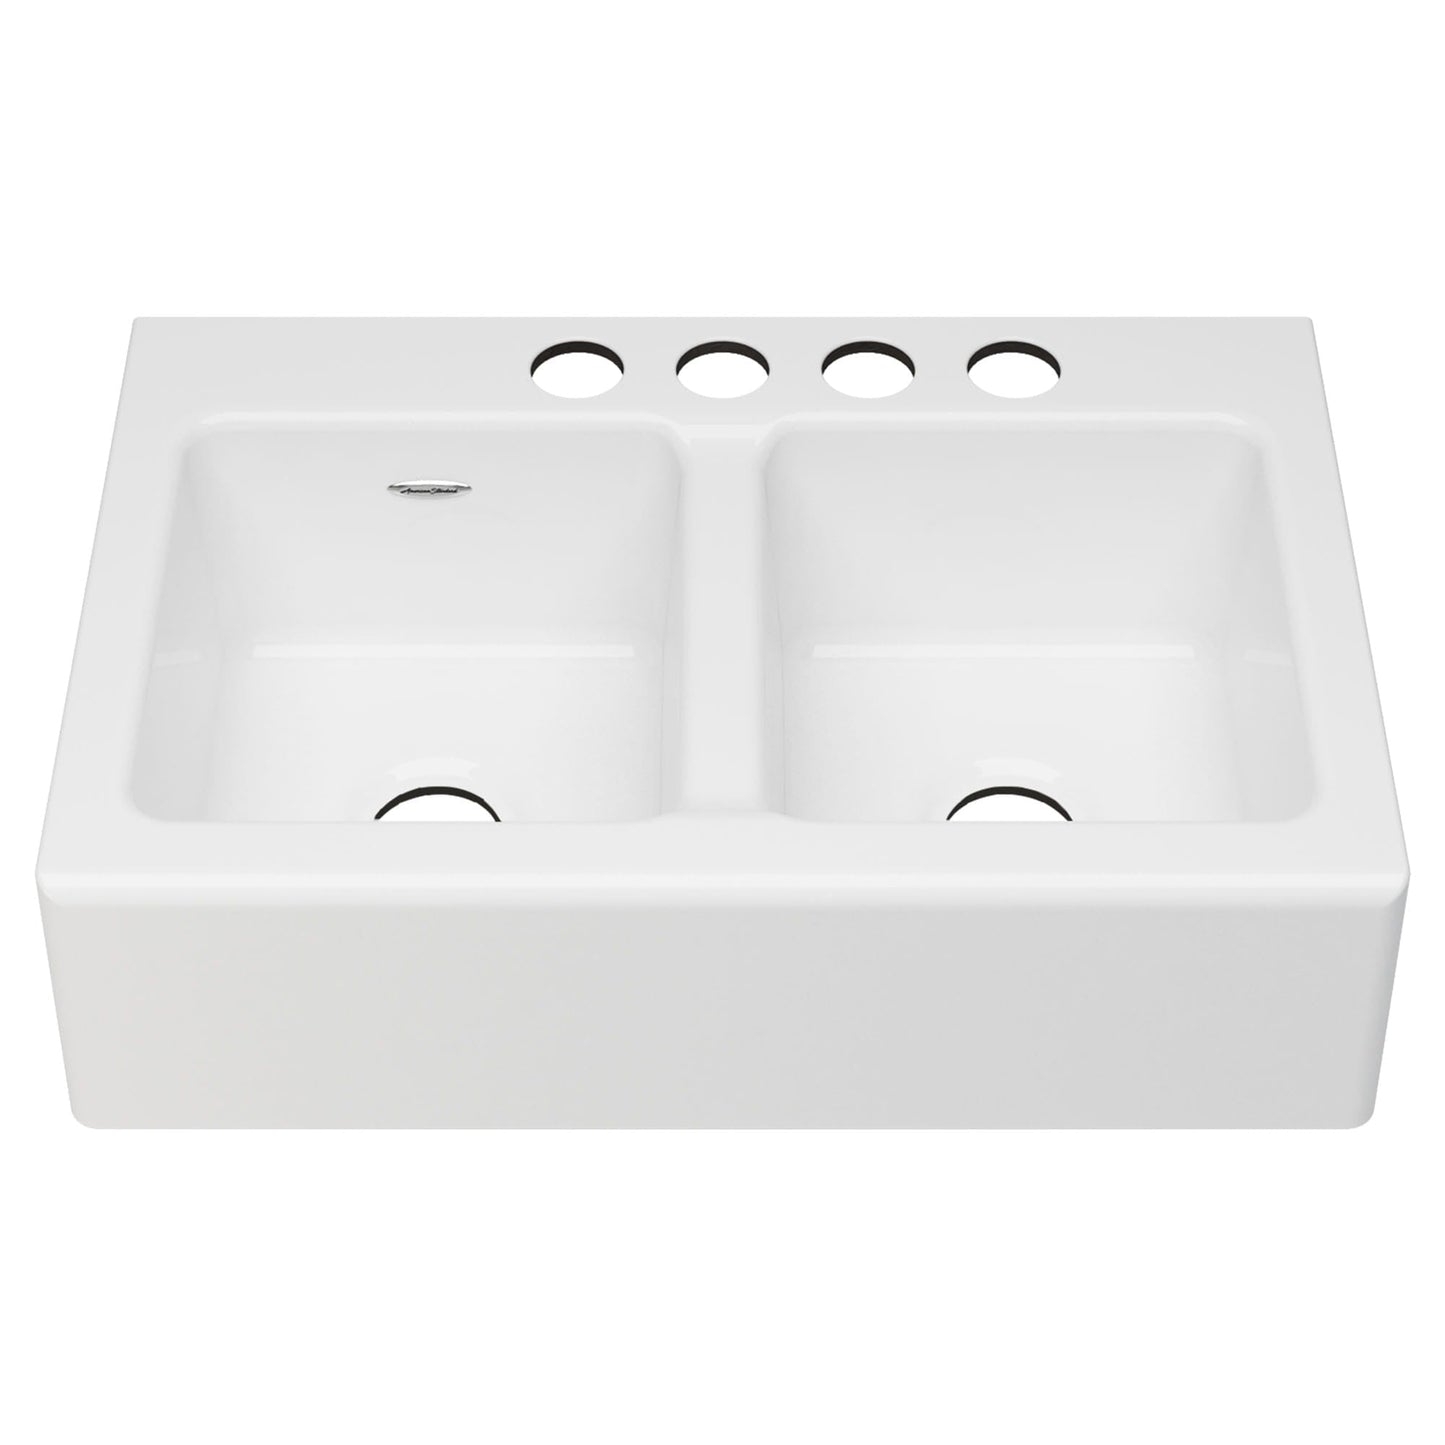 American Standard Delancey® 33 x 22-Inch Cast Iron 4-Hole Undermount Double-Bowl Apron Front Kitchen Sink - 77DB33220A